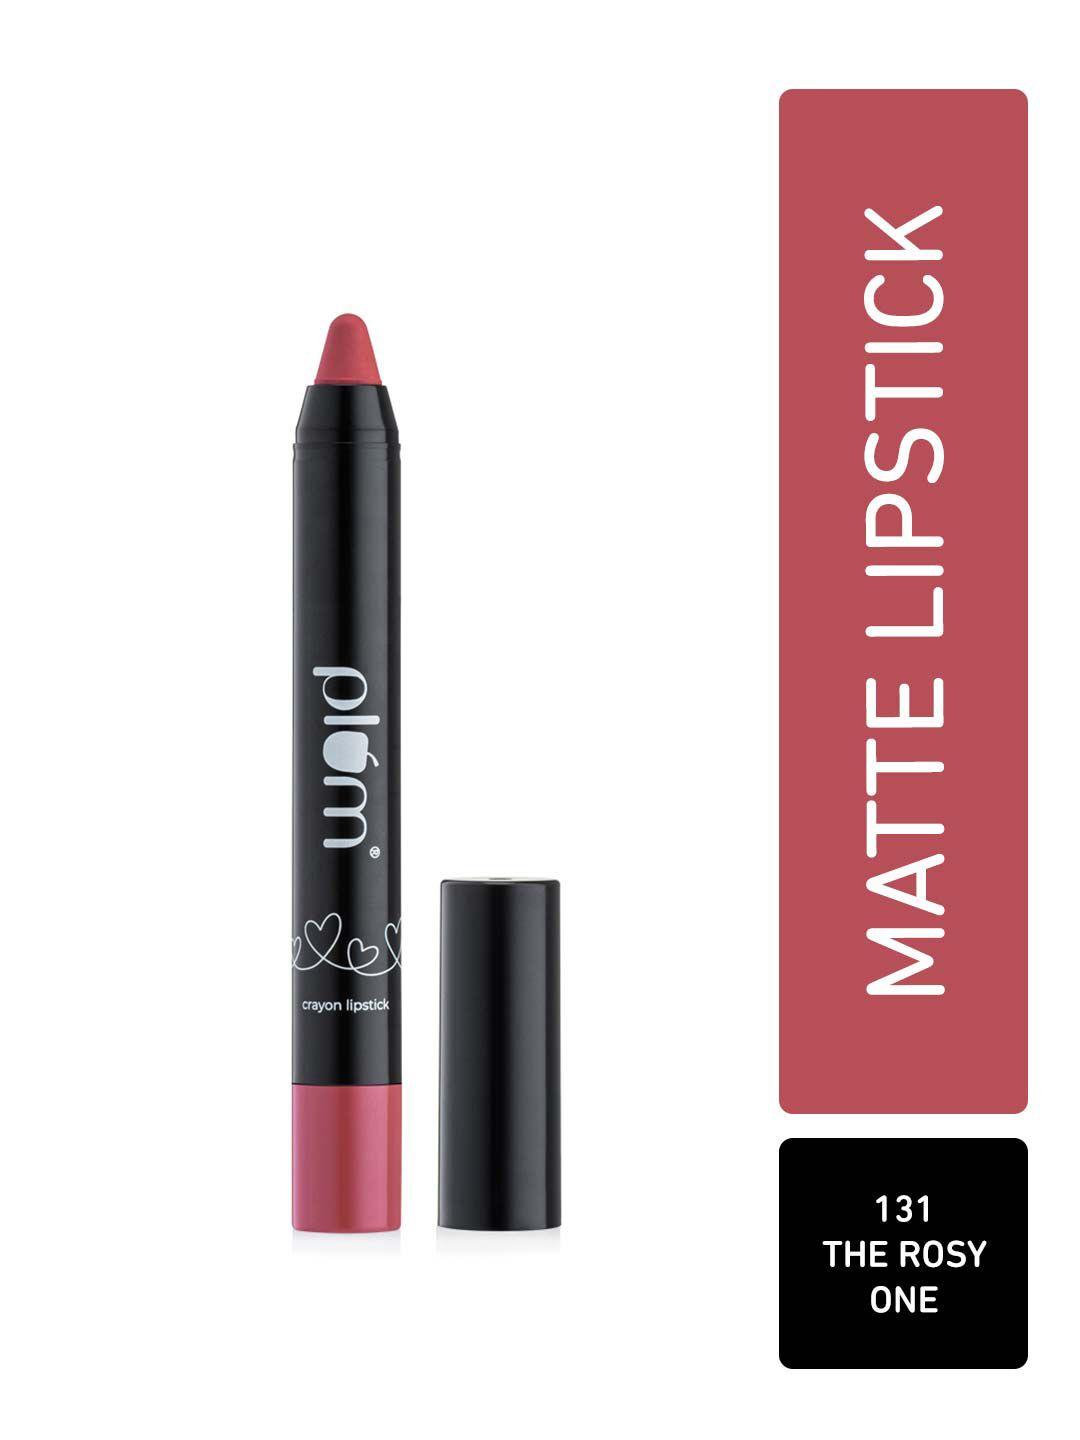 plum twist & go airbrushed finish matte crayon lipstick - 1.8g - the rosy one 131